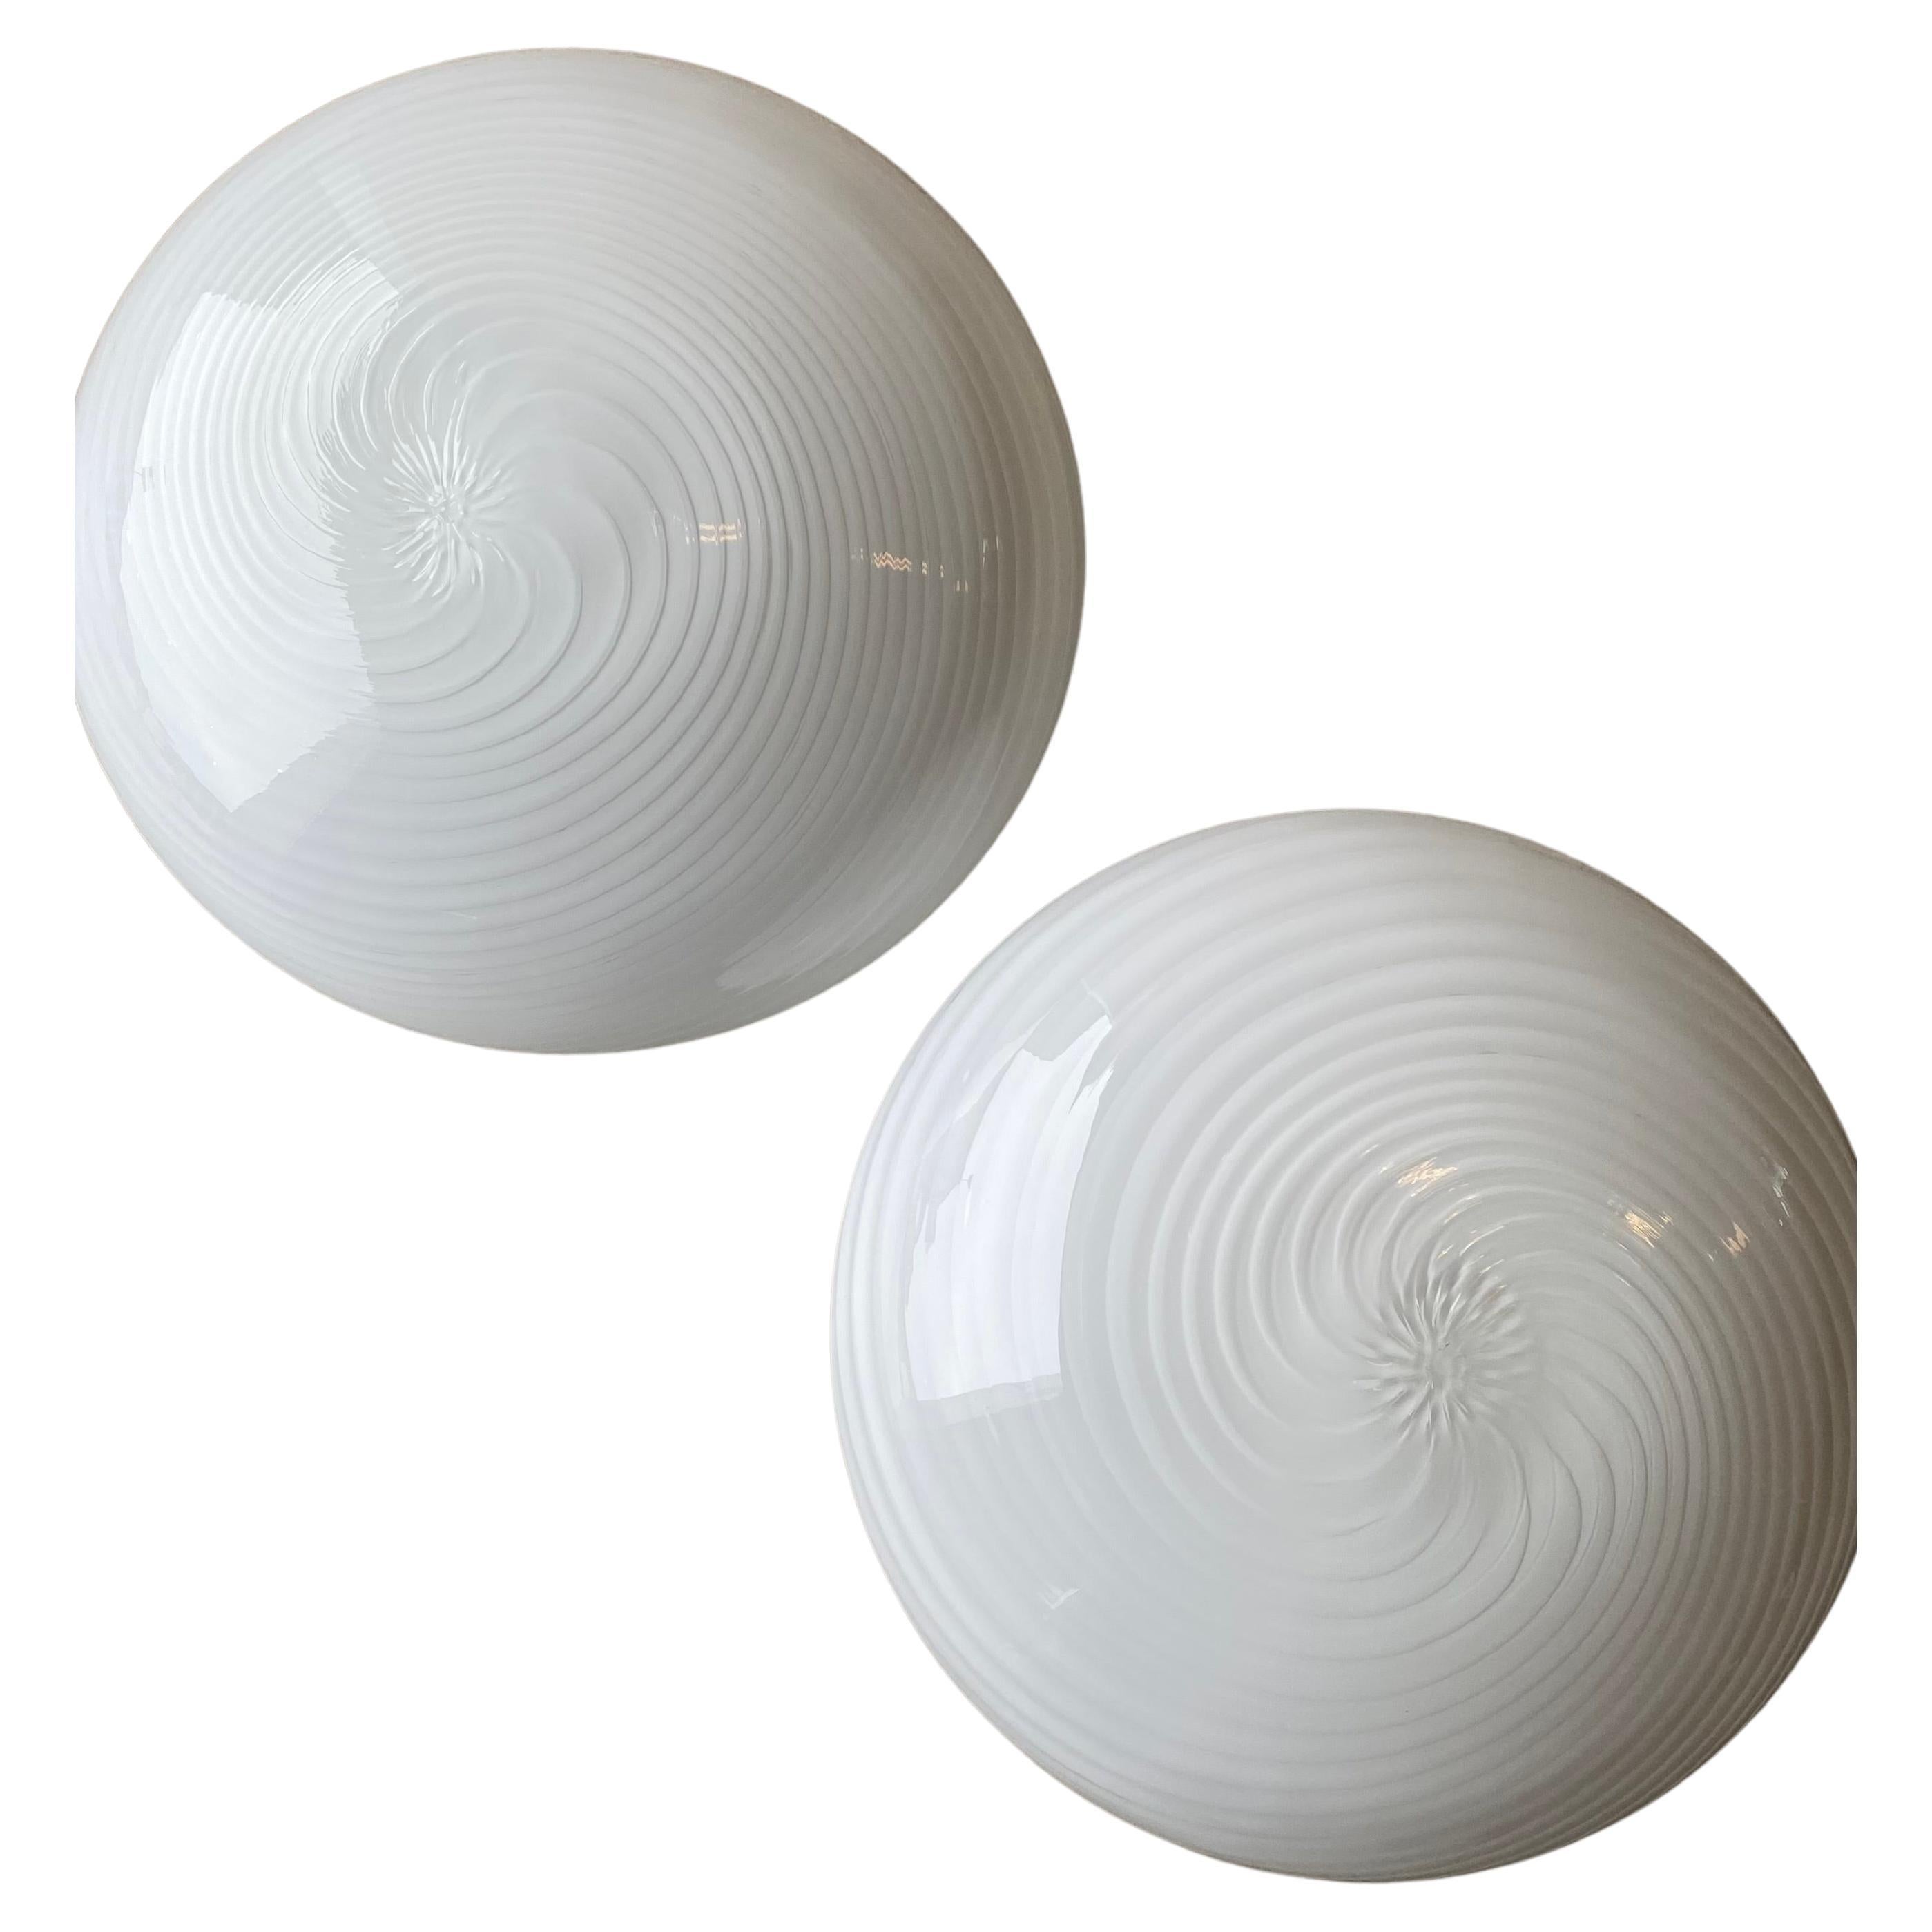 Pair of vintage Murano Flush Mount Ceiling Lamps White Swirl Glass, Italy 1970s For Sale